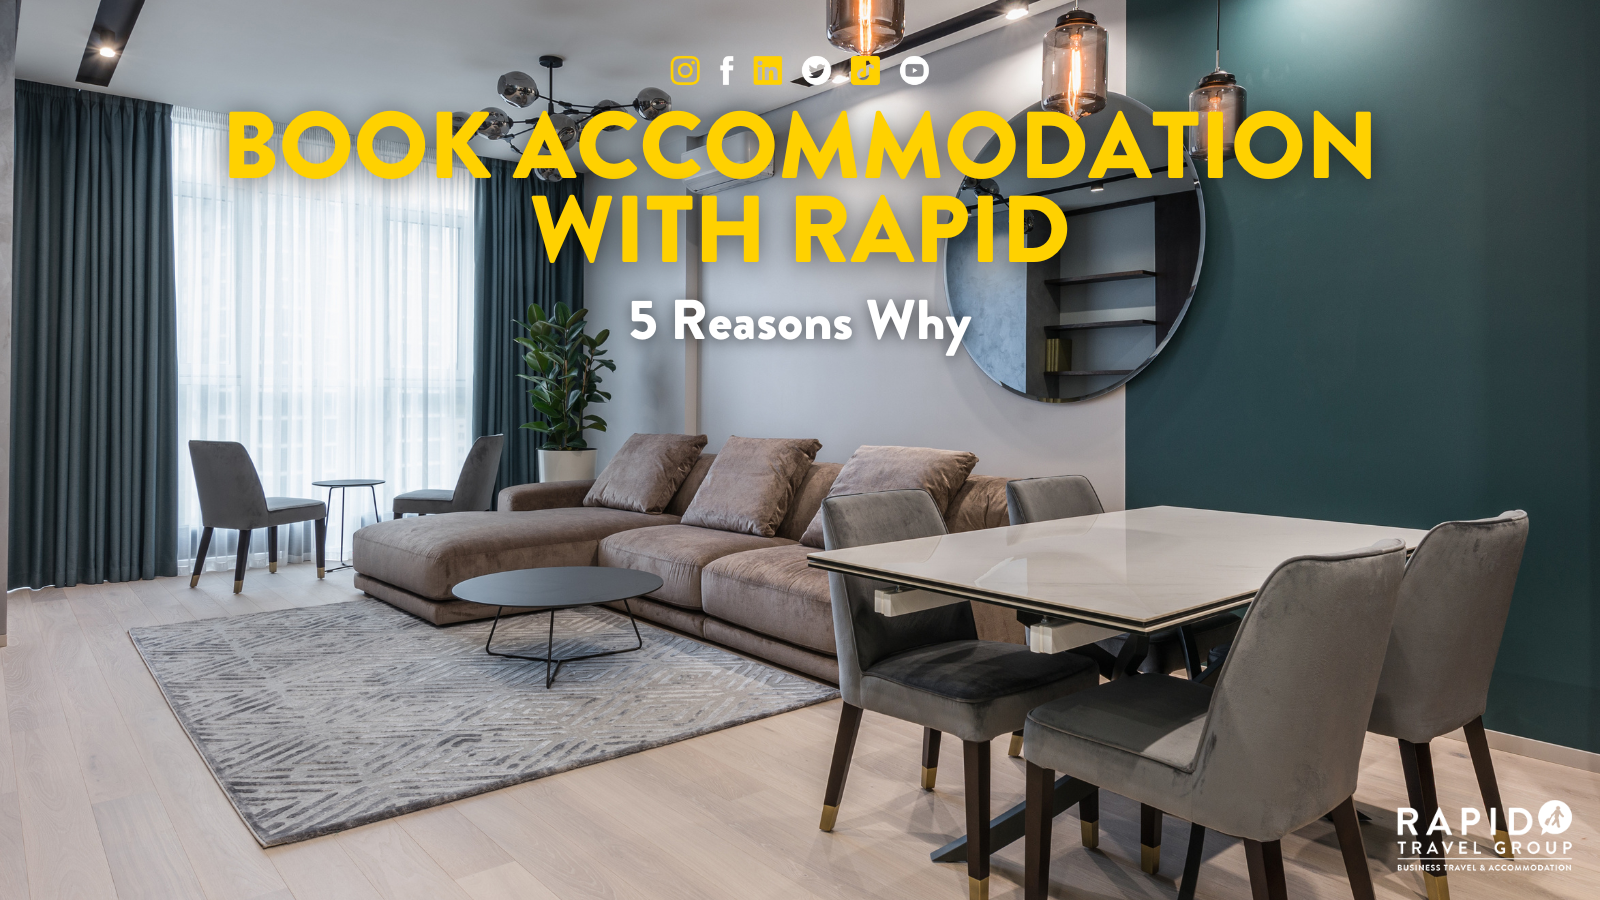 book accommodation with rapid: 5 reasons why